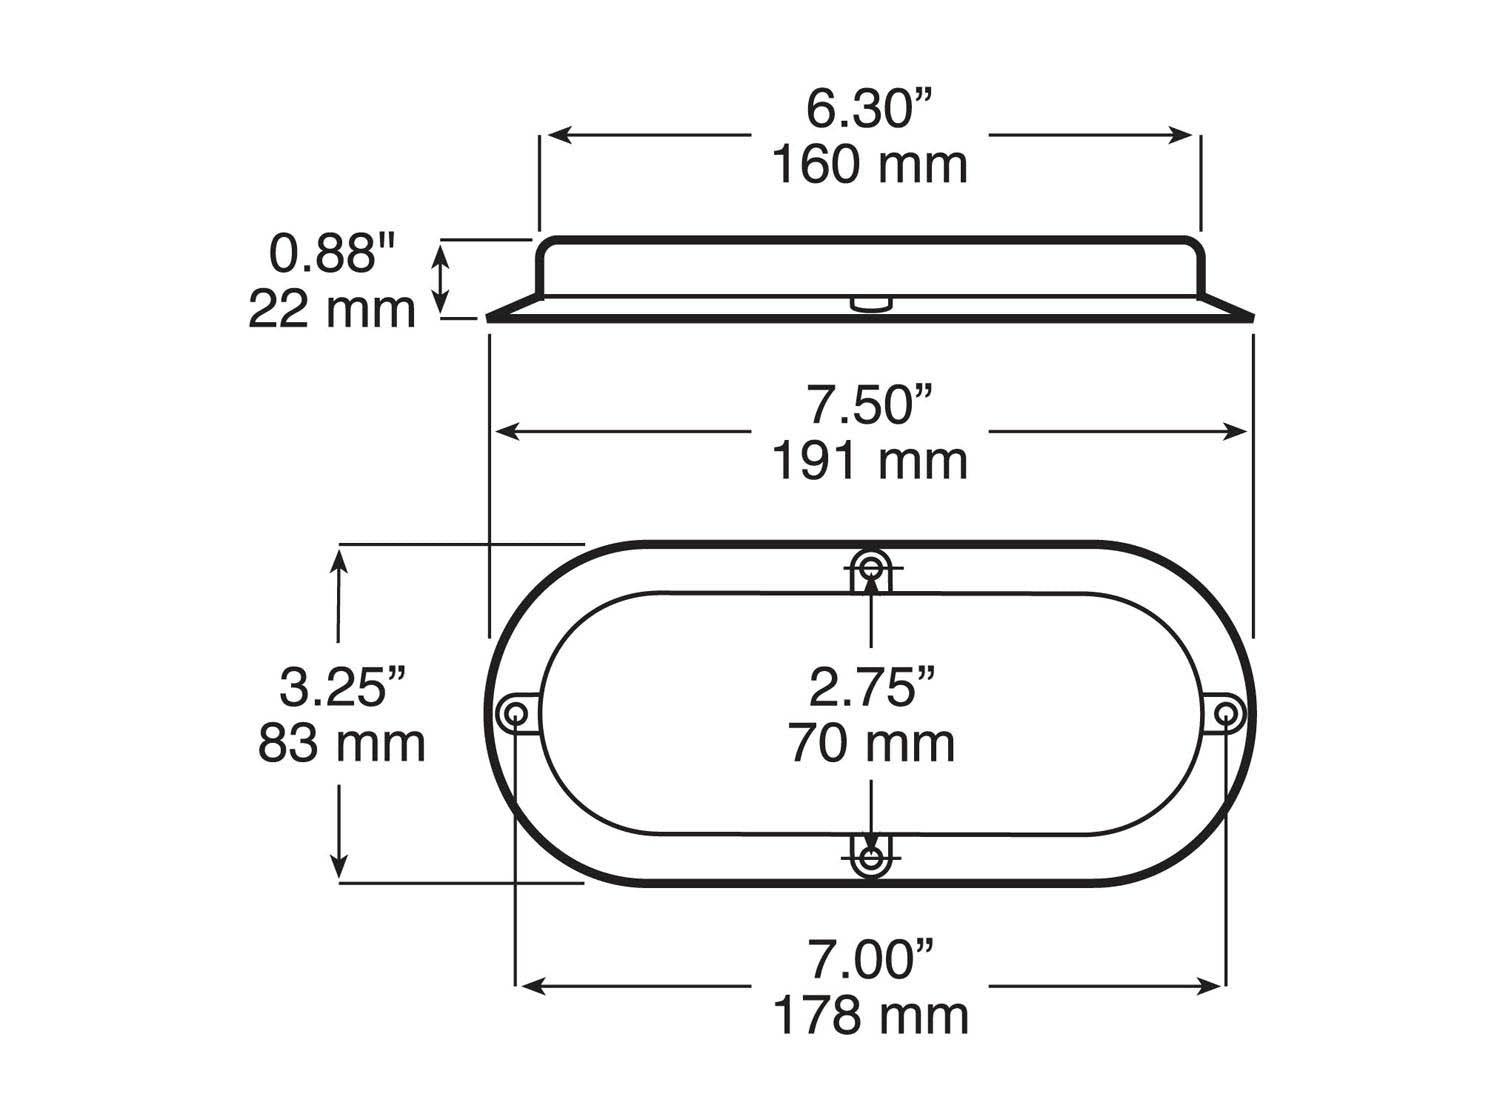 LED Stop/Turn/Tail, Oval, w/ Flange, 7.88"X3.63", Multi-volt, red, bulk pack (Pack of 50) - 423-4_line_dual_2view-BX5_992483a8-3d52-4da0-93e2-12ff7dd6f9b0